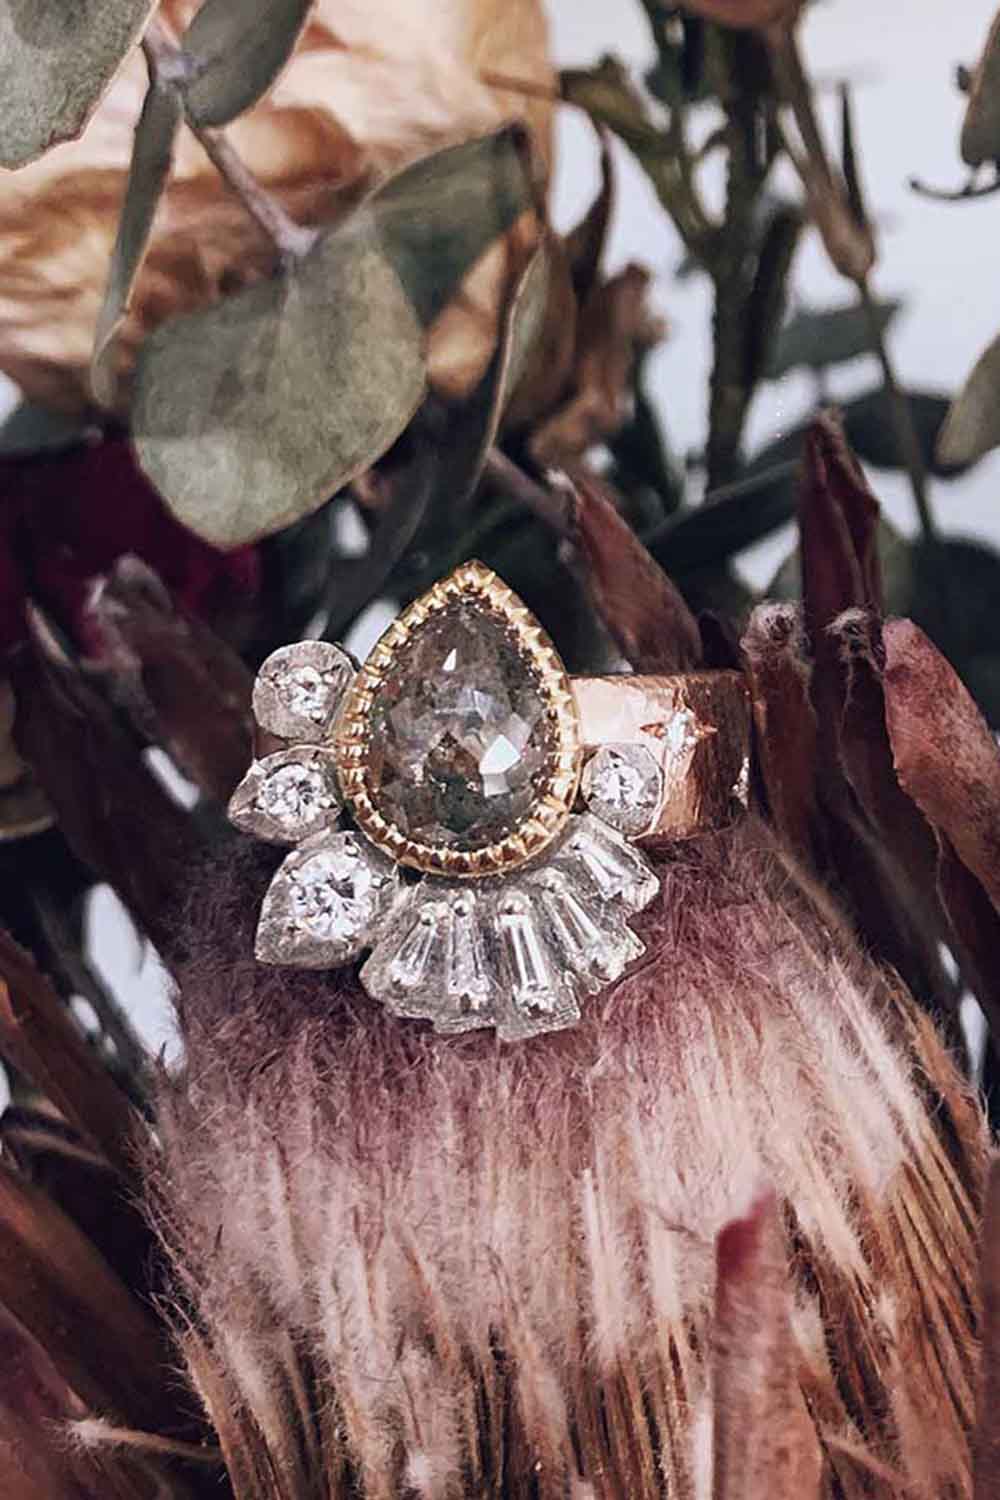 Rose gold, white gold, yellow gold, salt and pepper diamond ring with heirloom diamonds (and a hidden emerald)